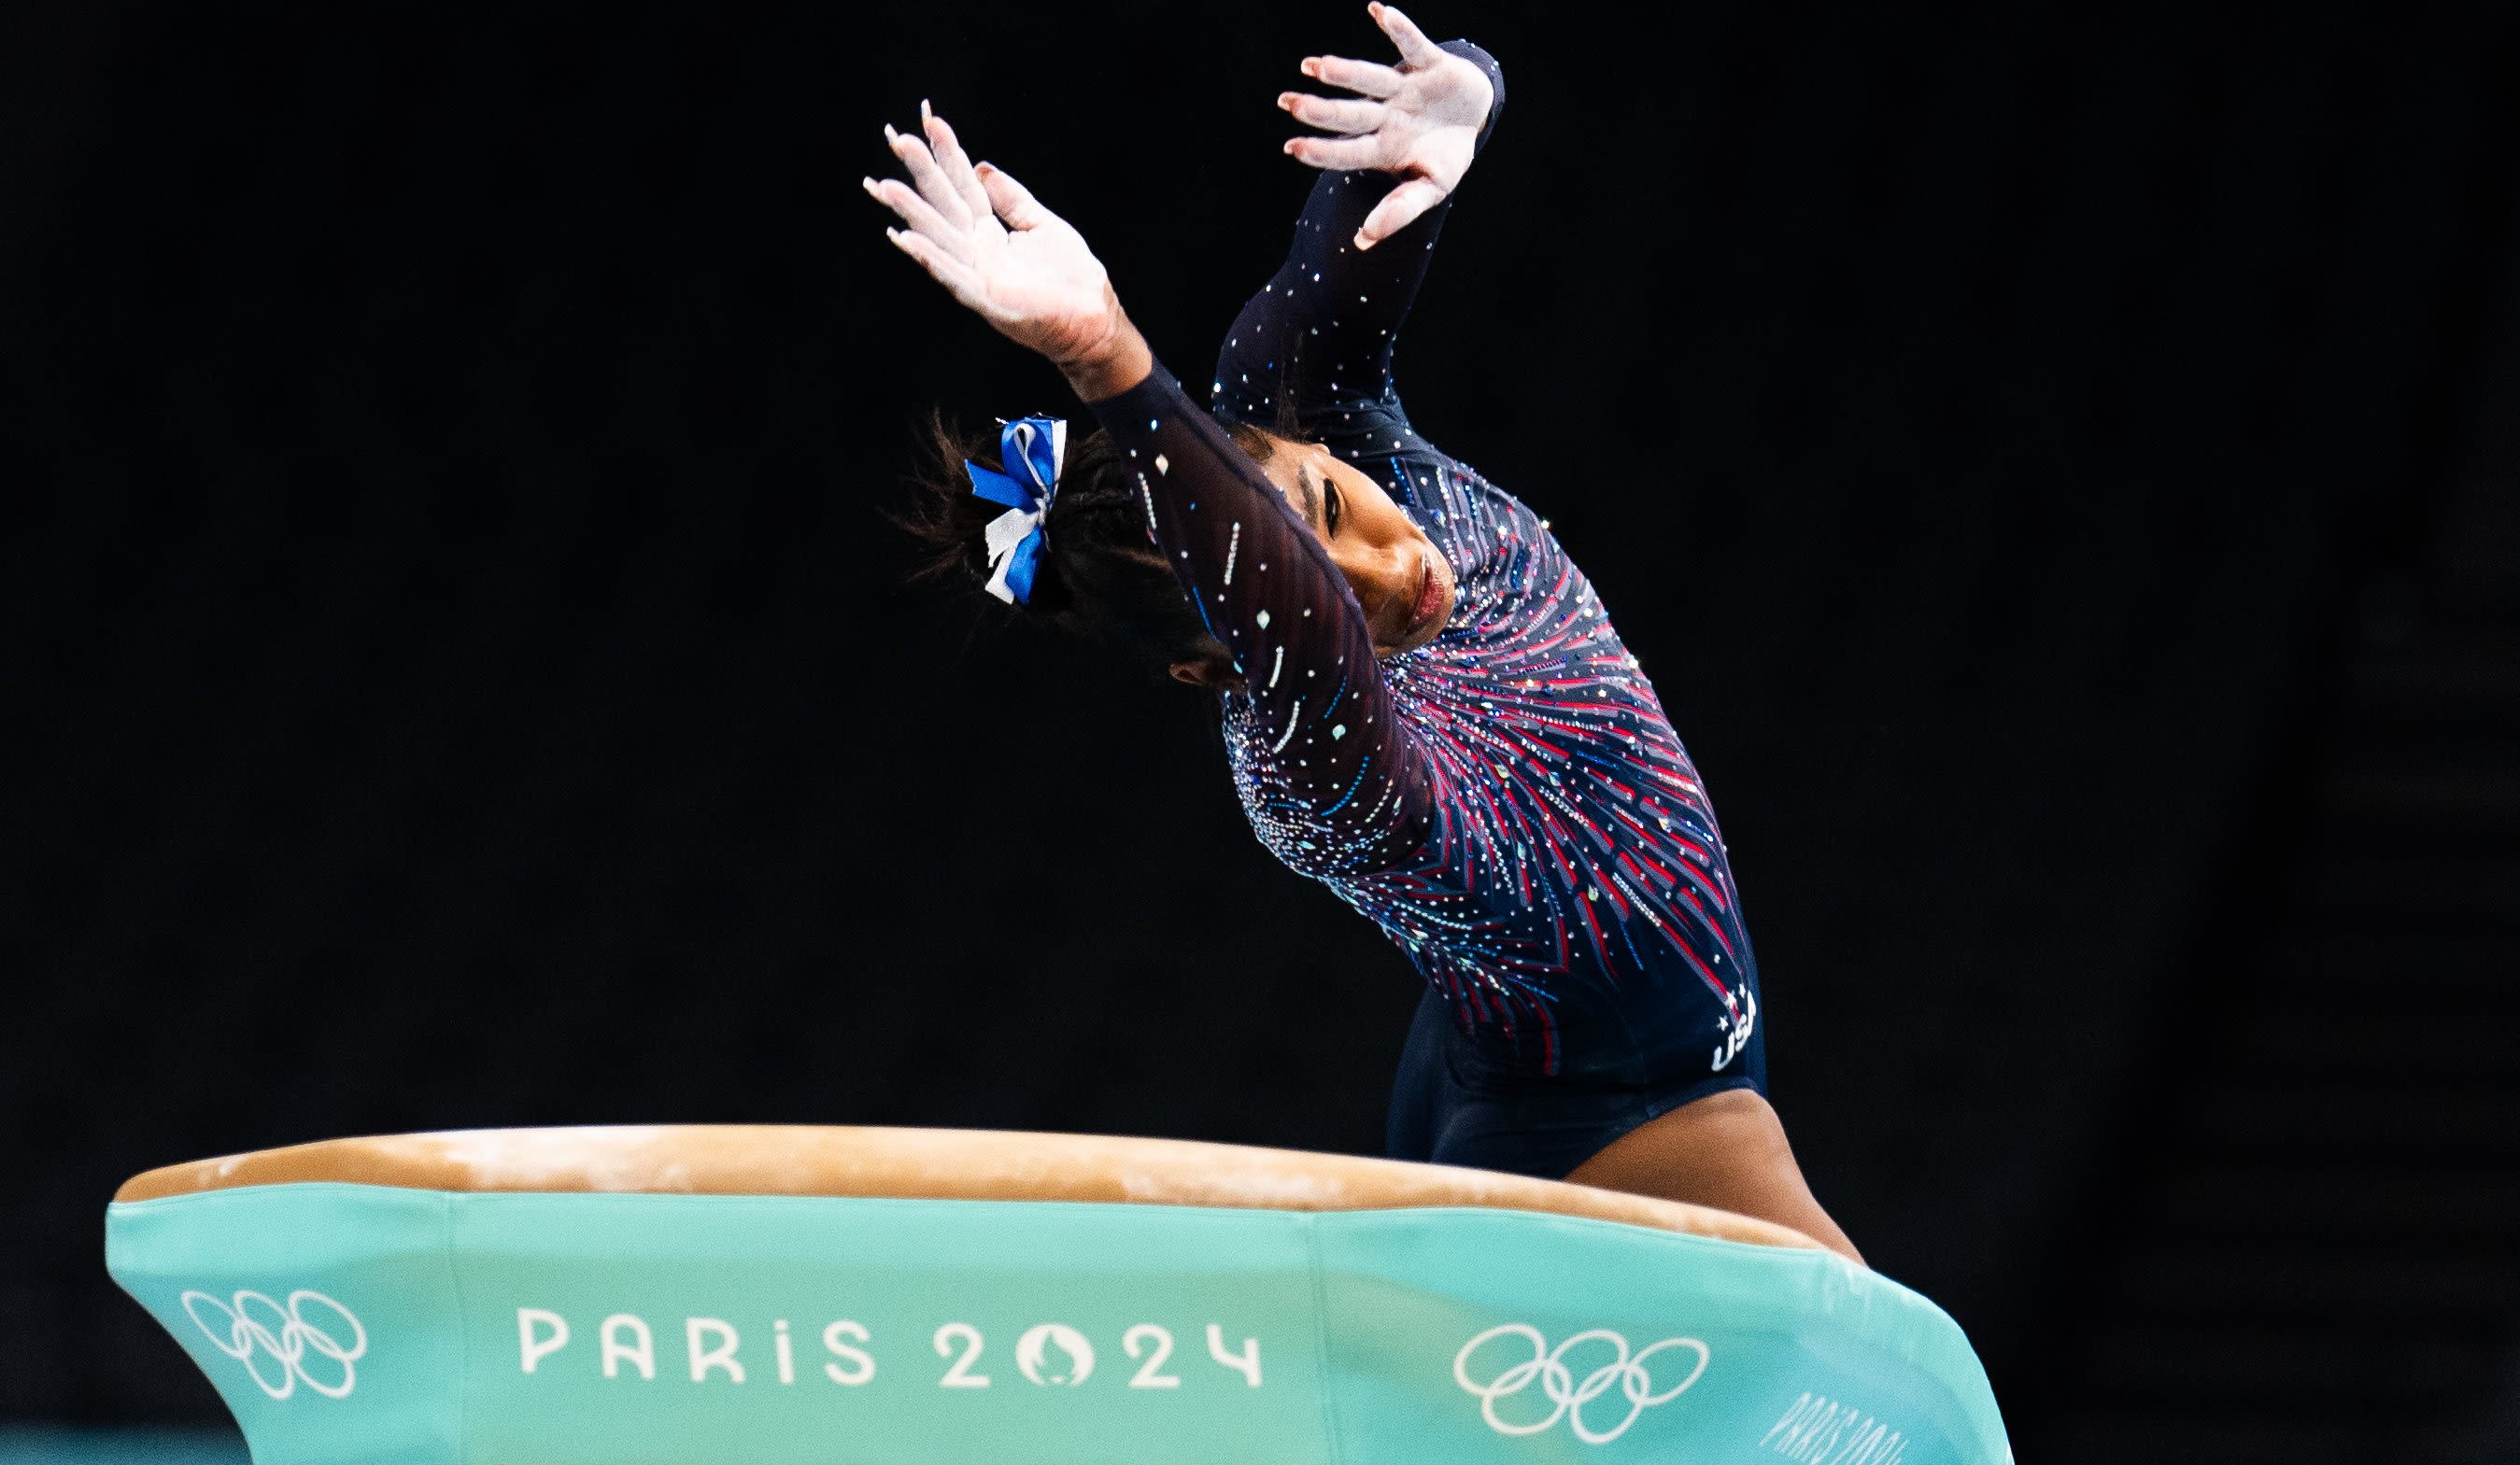 How women’s gymnastics is scored at the Olympics, and how Simone Biles pushes those boundaries